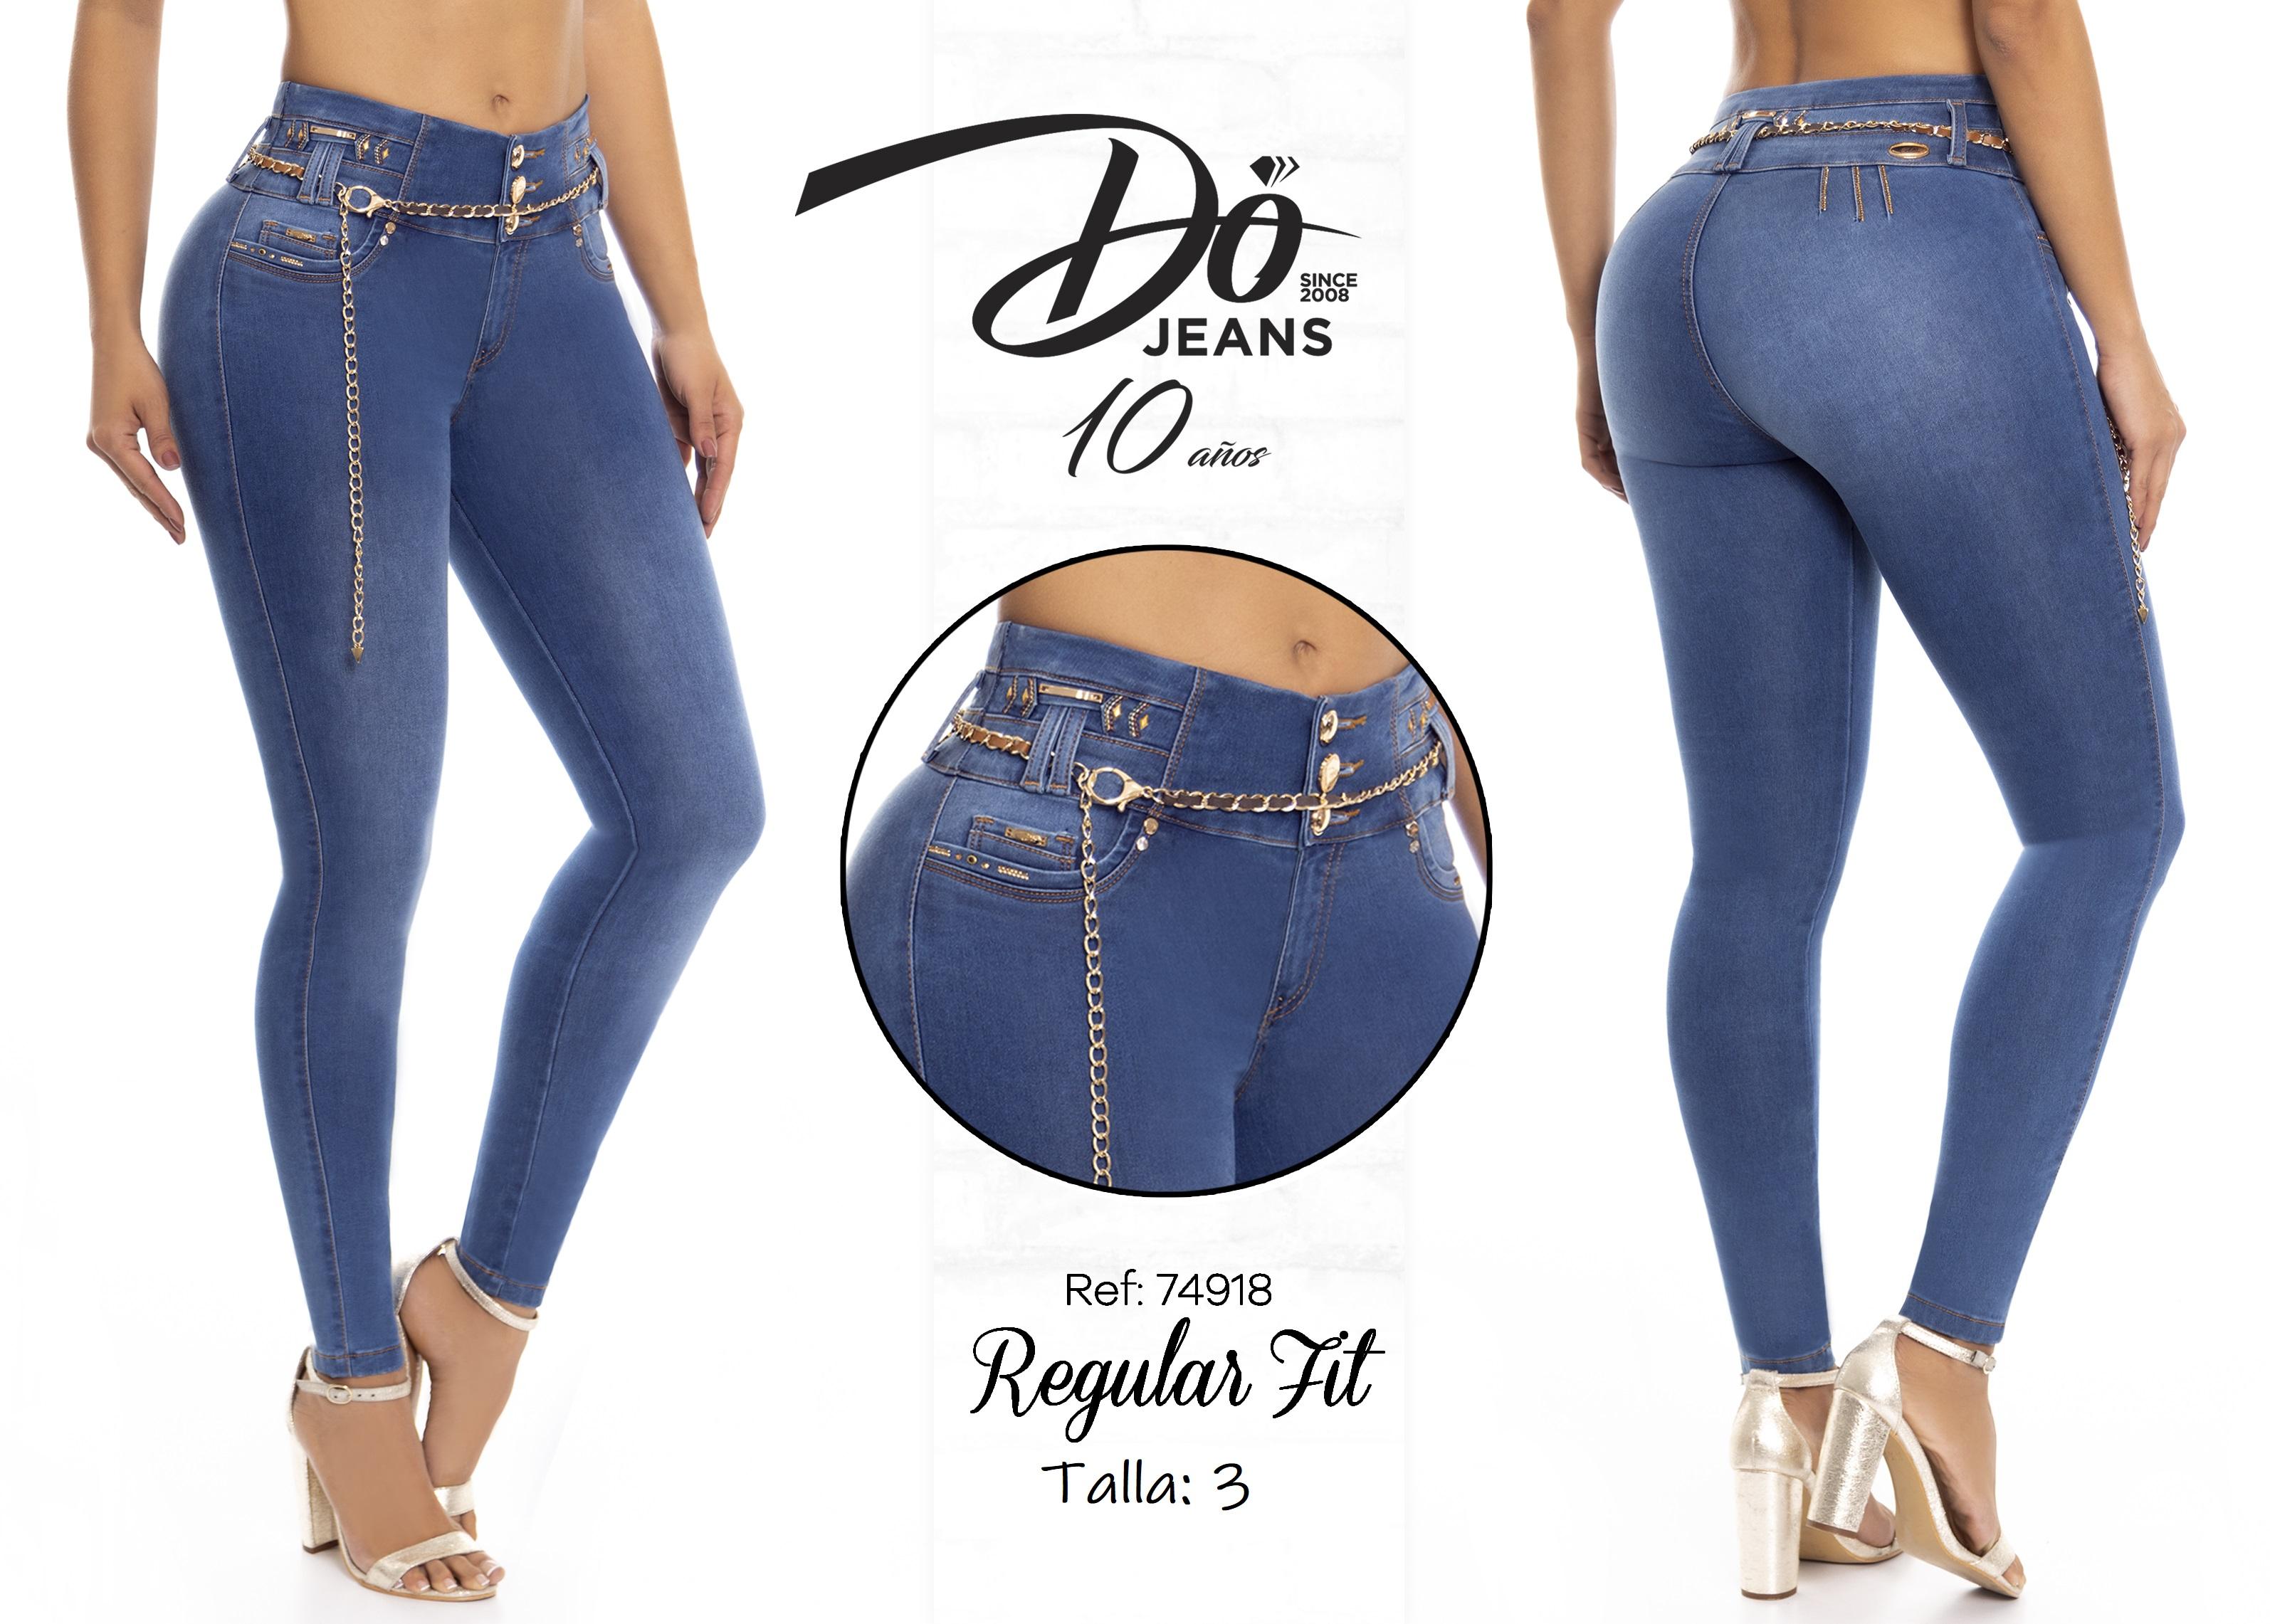 Jeans Levantacola Colombiano - Ref. 248 -74918 D